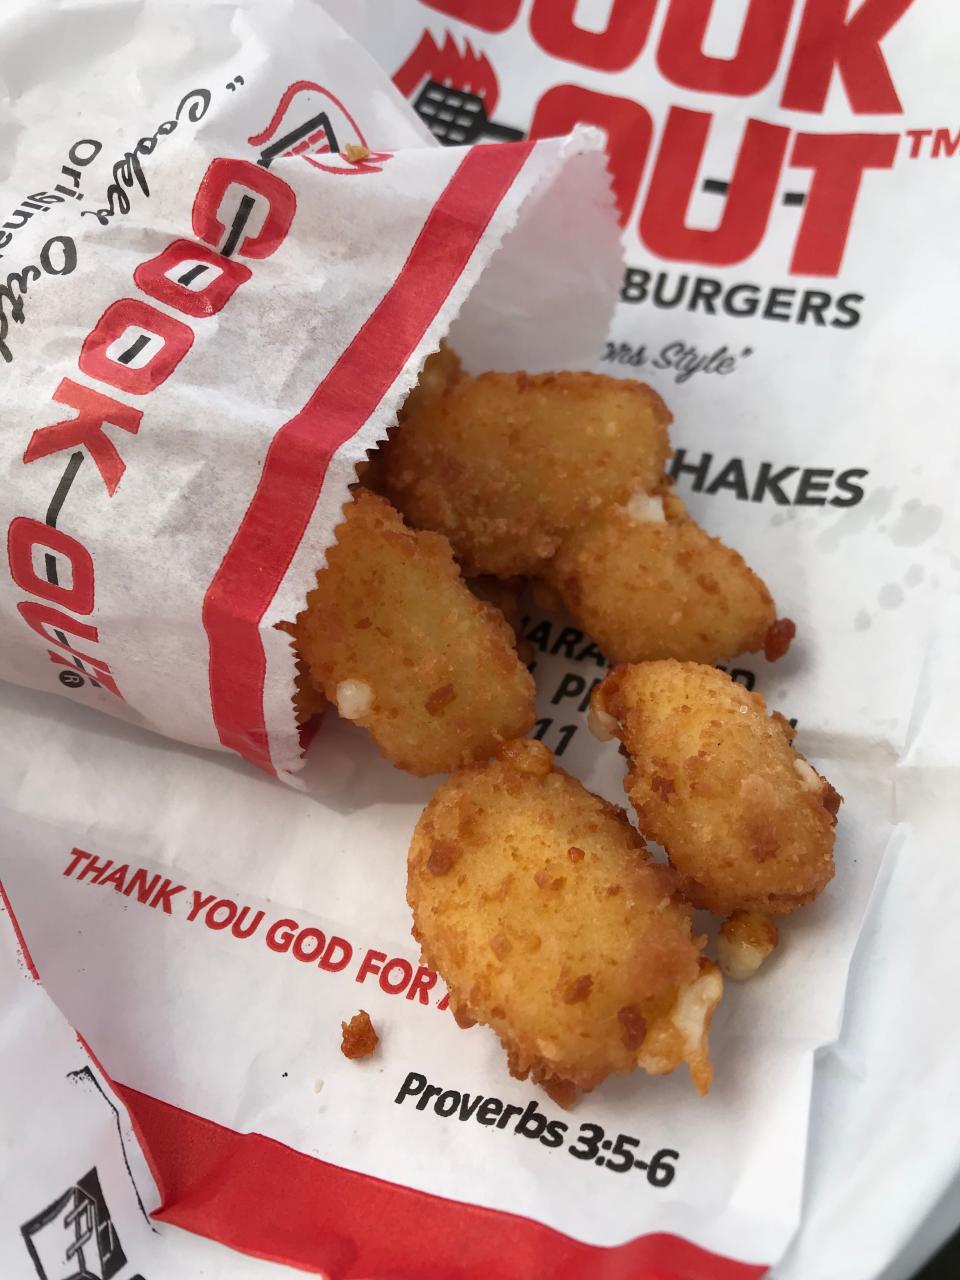 Among the many side options at Cook Out are the white cheddar cheese bites.